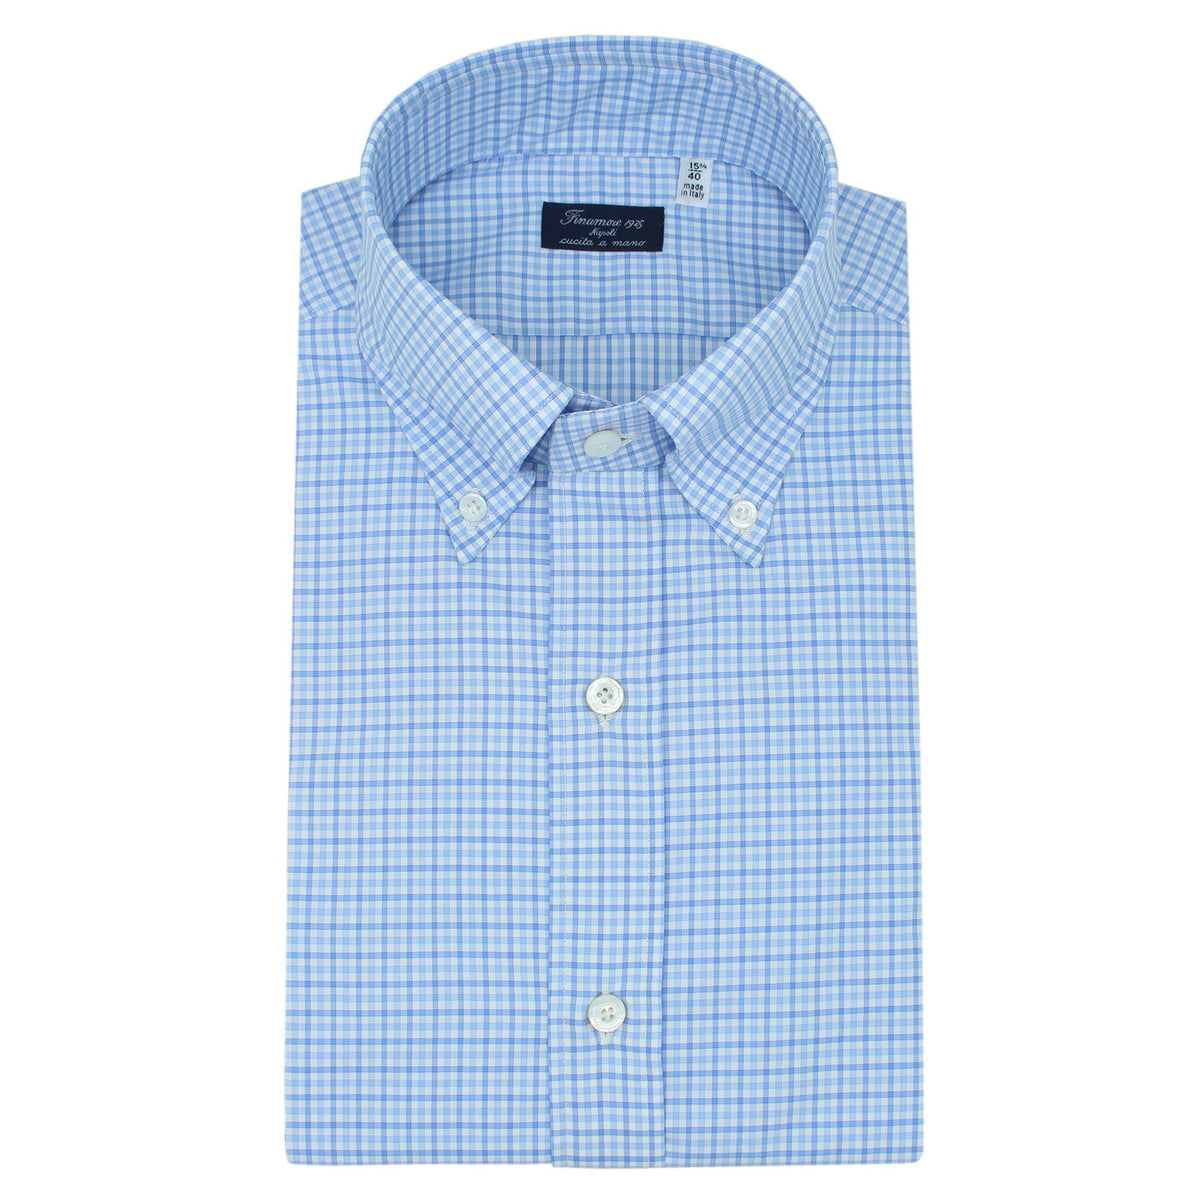 Naples classic fit shirt with light blue checkered pattern